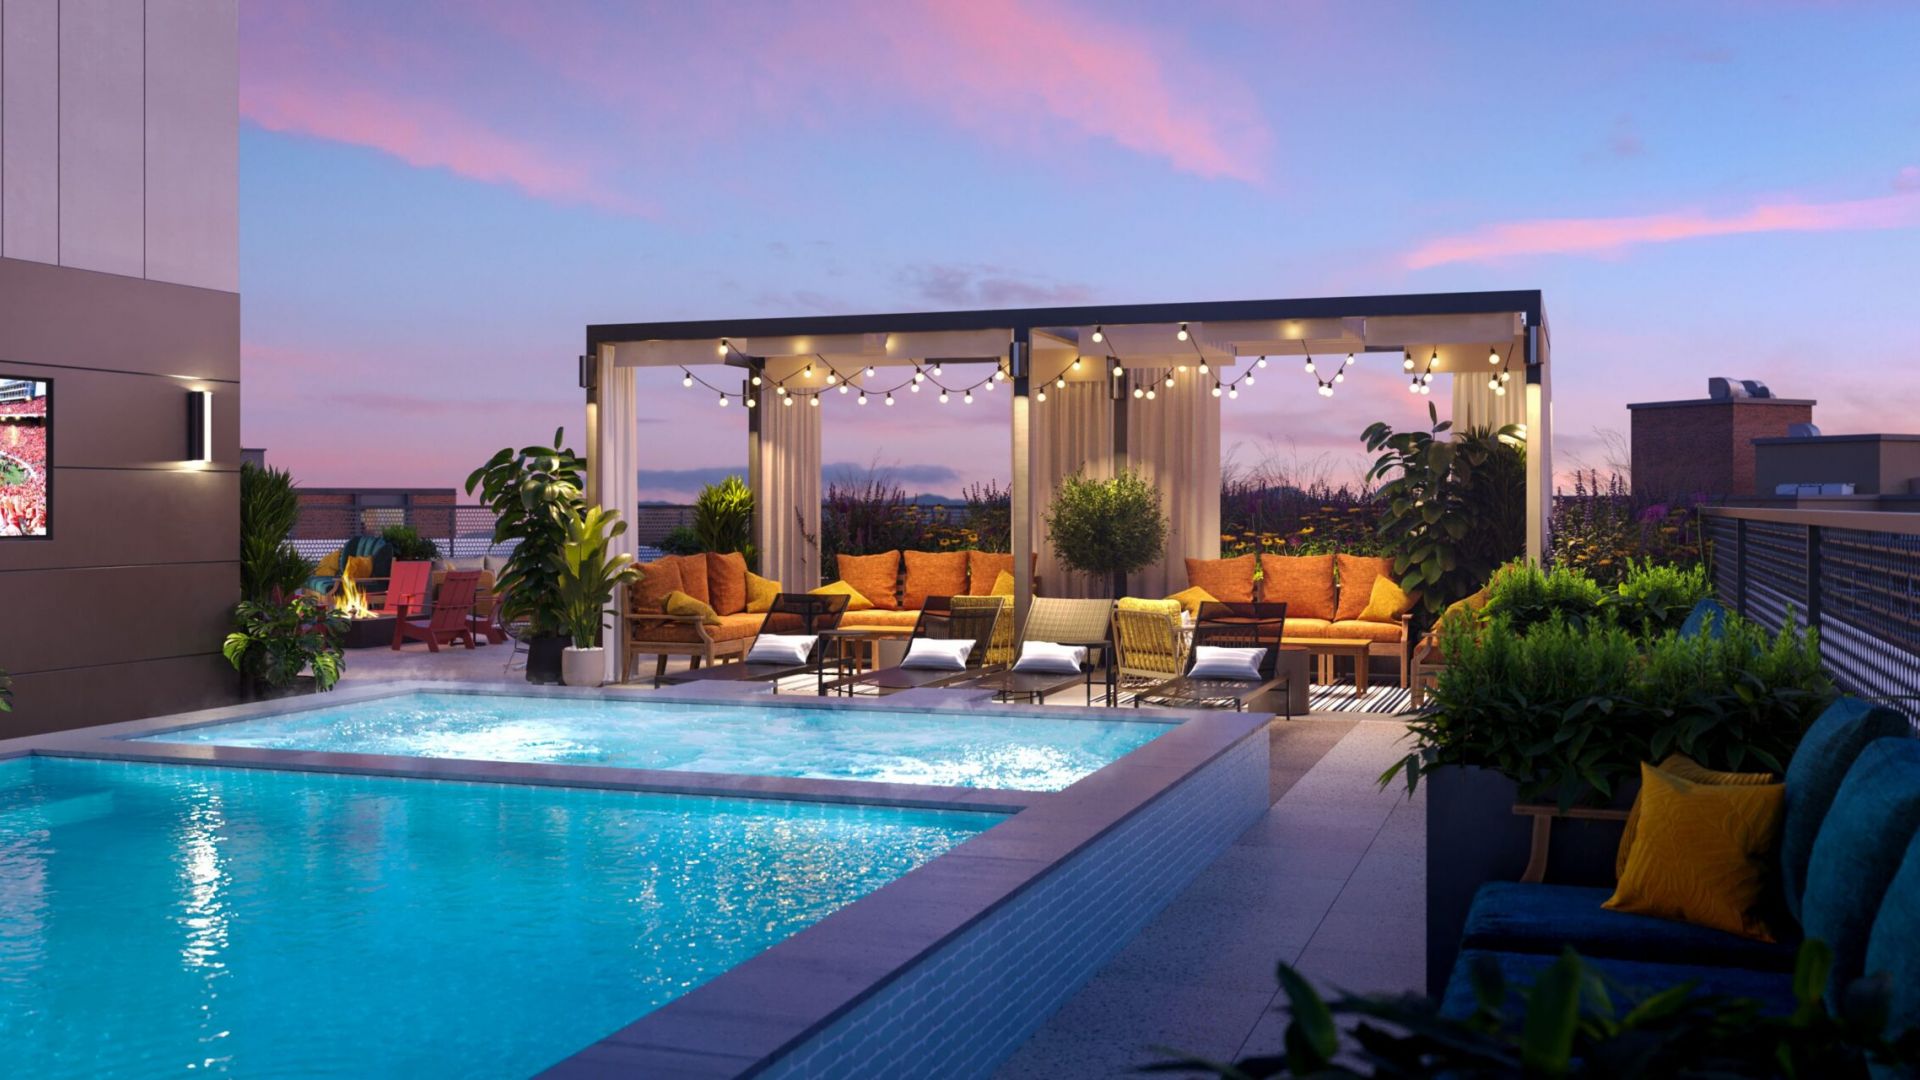 VERVE Madison pool rendering with beautiful pool and terrace